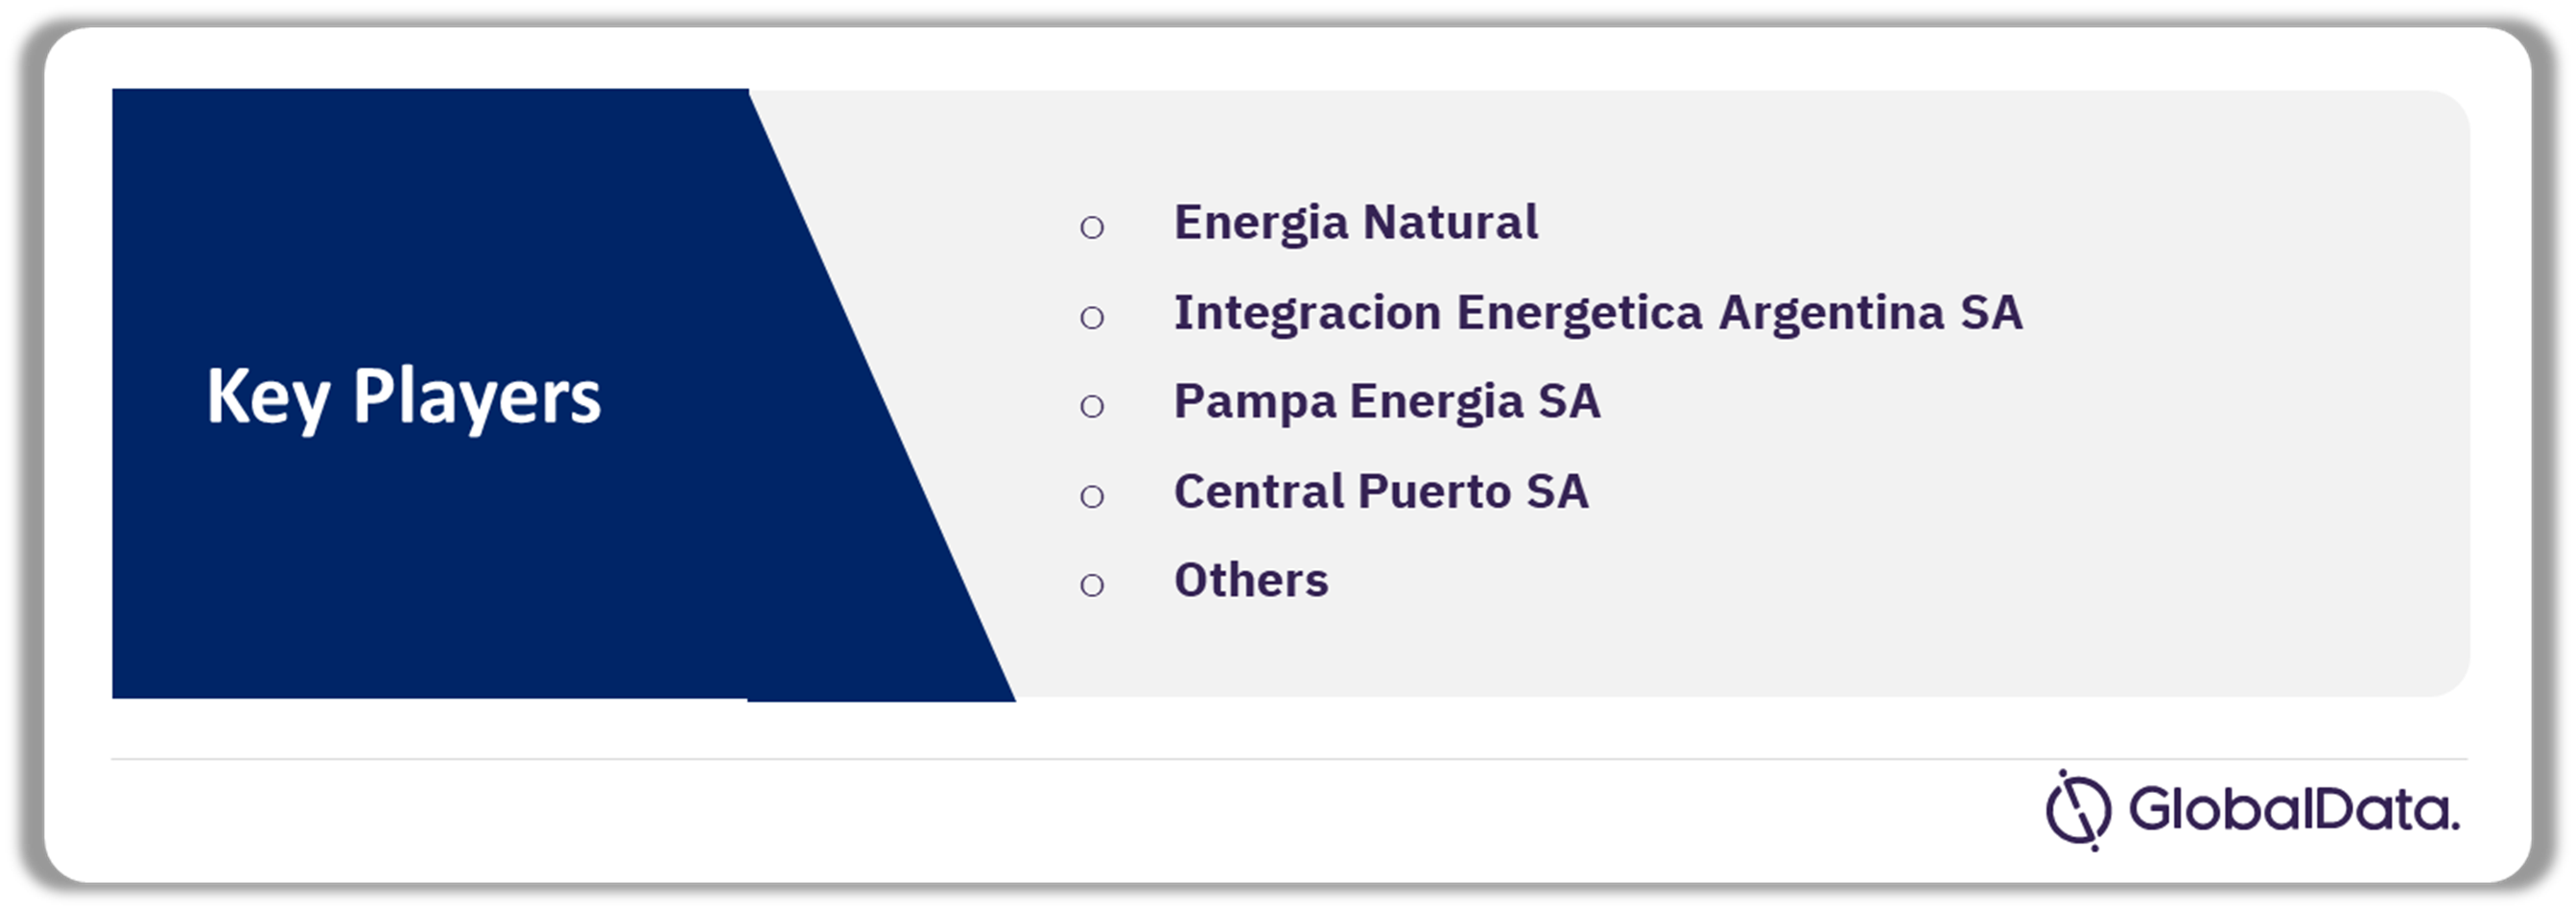 Argentina Thermal Power Market Analysis by Companies